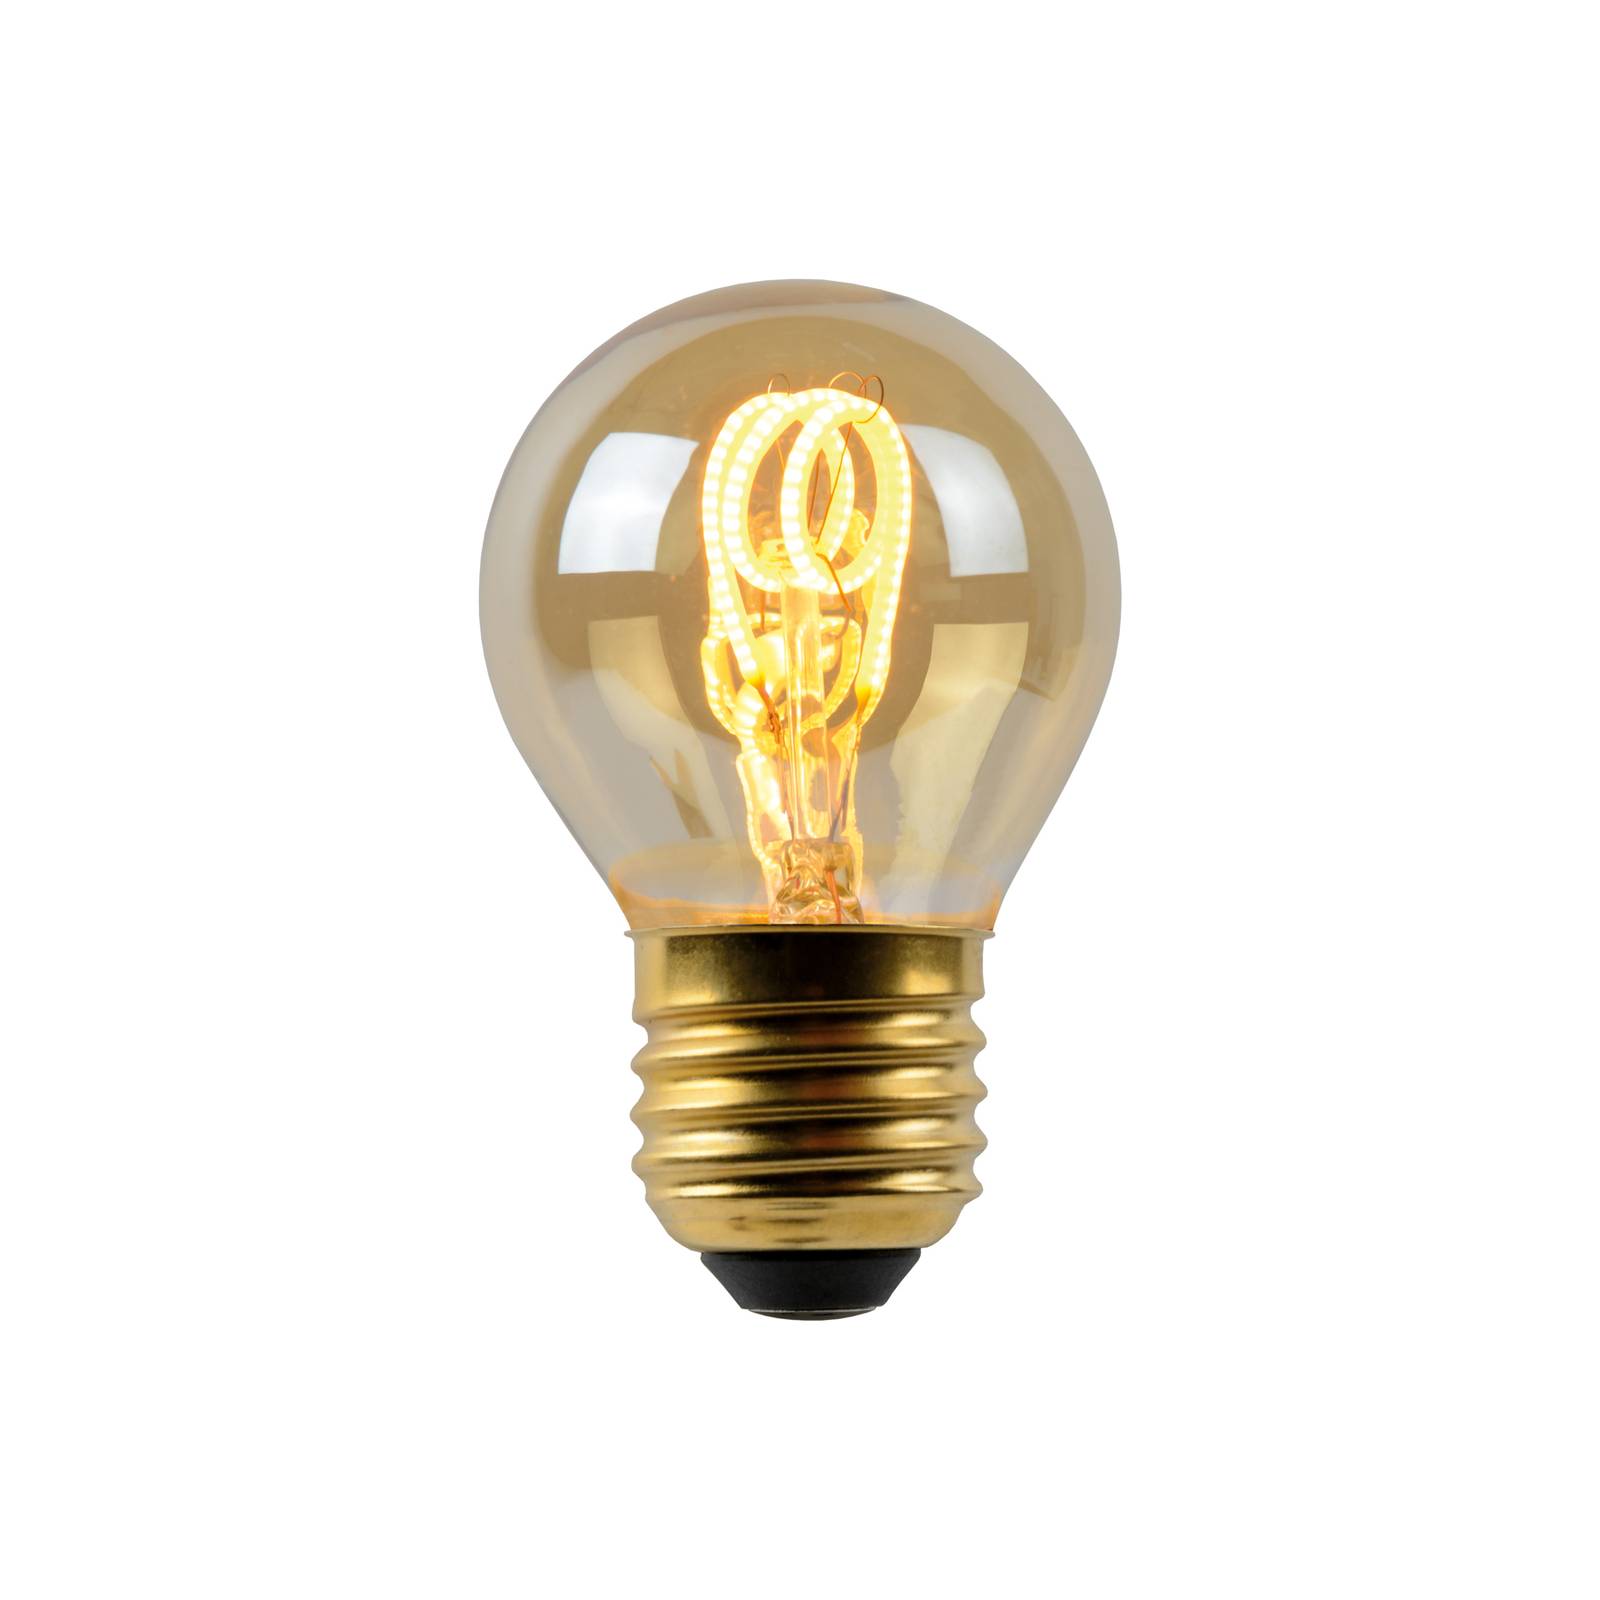 Lucide LED-Lampe E27 G45 3W amber 2.200K dimmbar